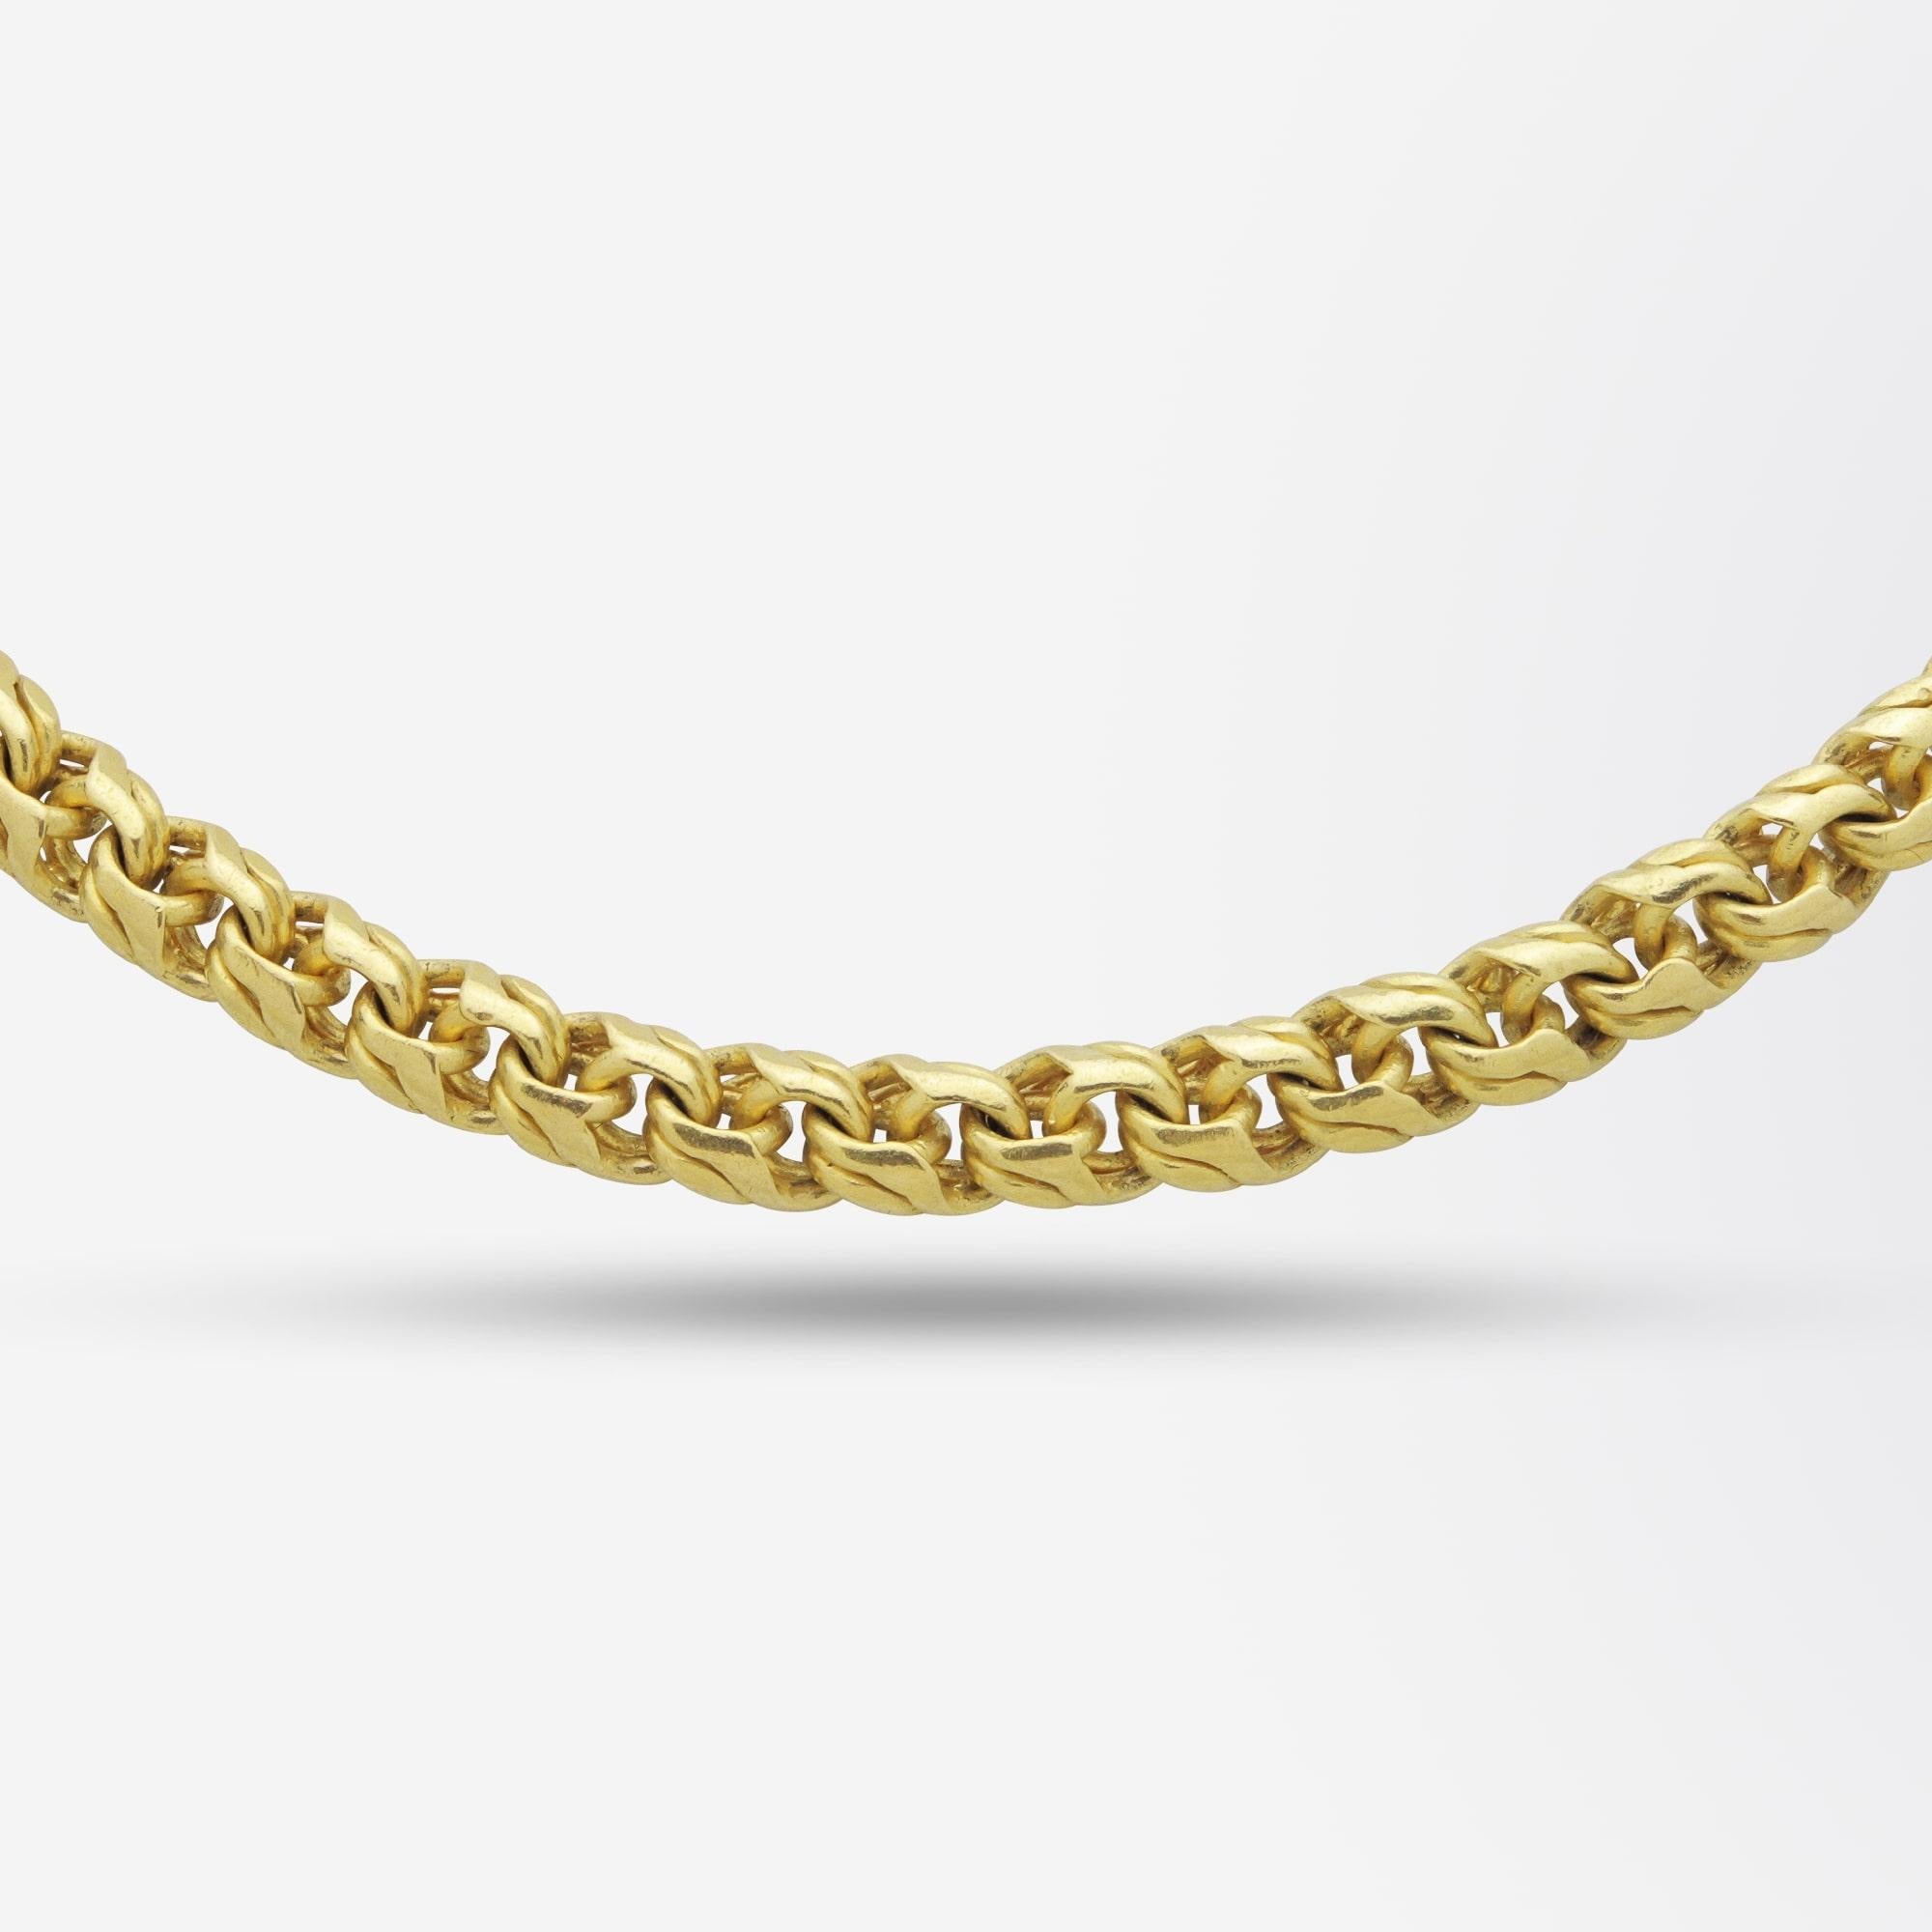 A beautifully made 23 karat yellow gold chain necklace with a 'baht' gold clasp. The fancy link chain has six rings where it can be secured with its clasp enabling it to be worn as long as 66cm in length or as short as 47.5cm in length. Beautifully